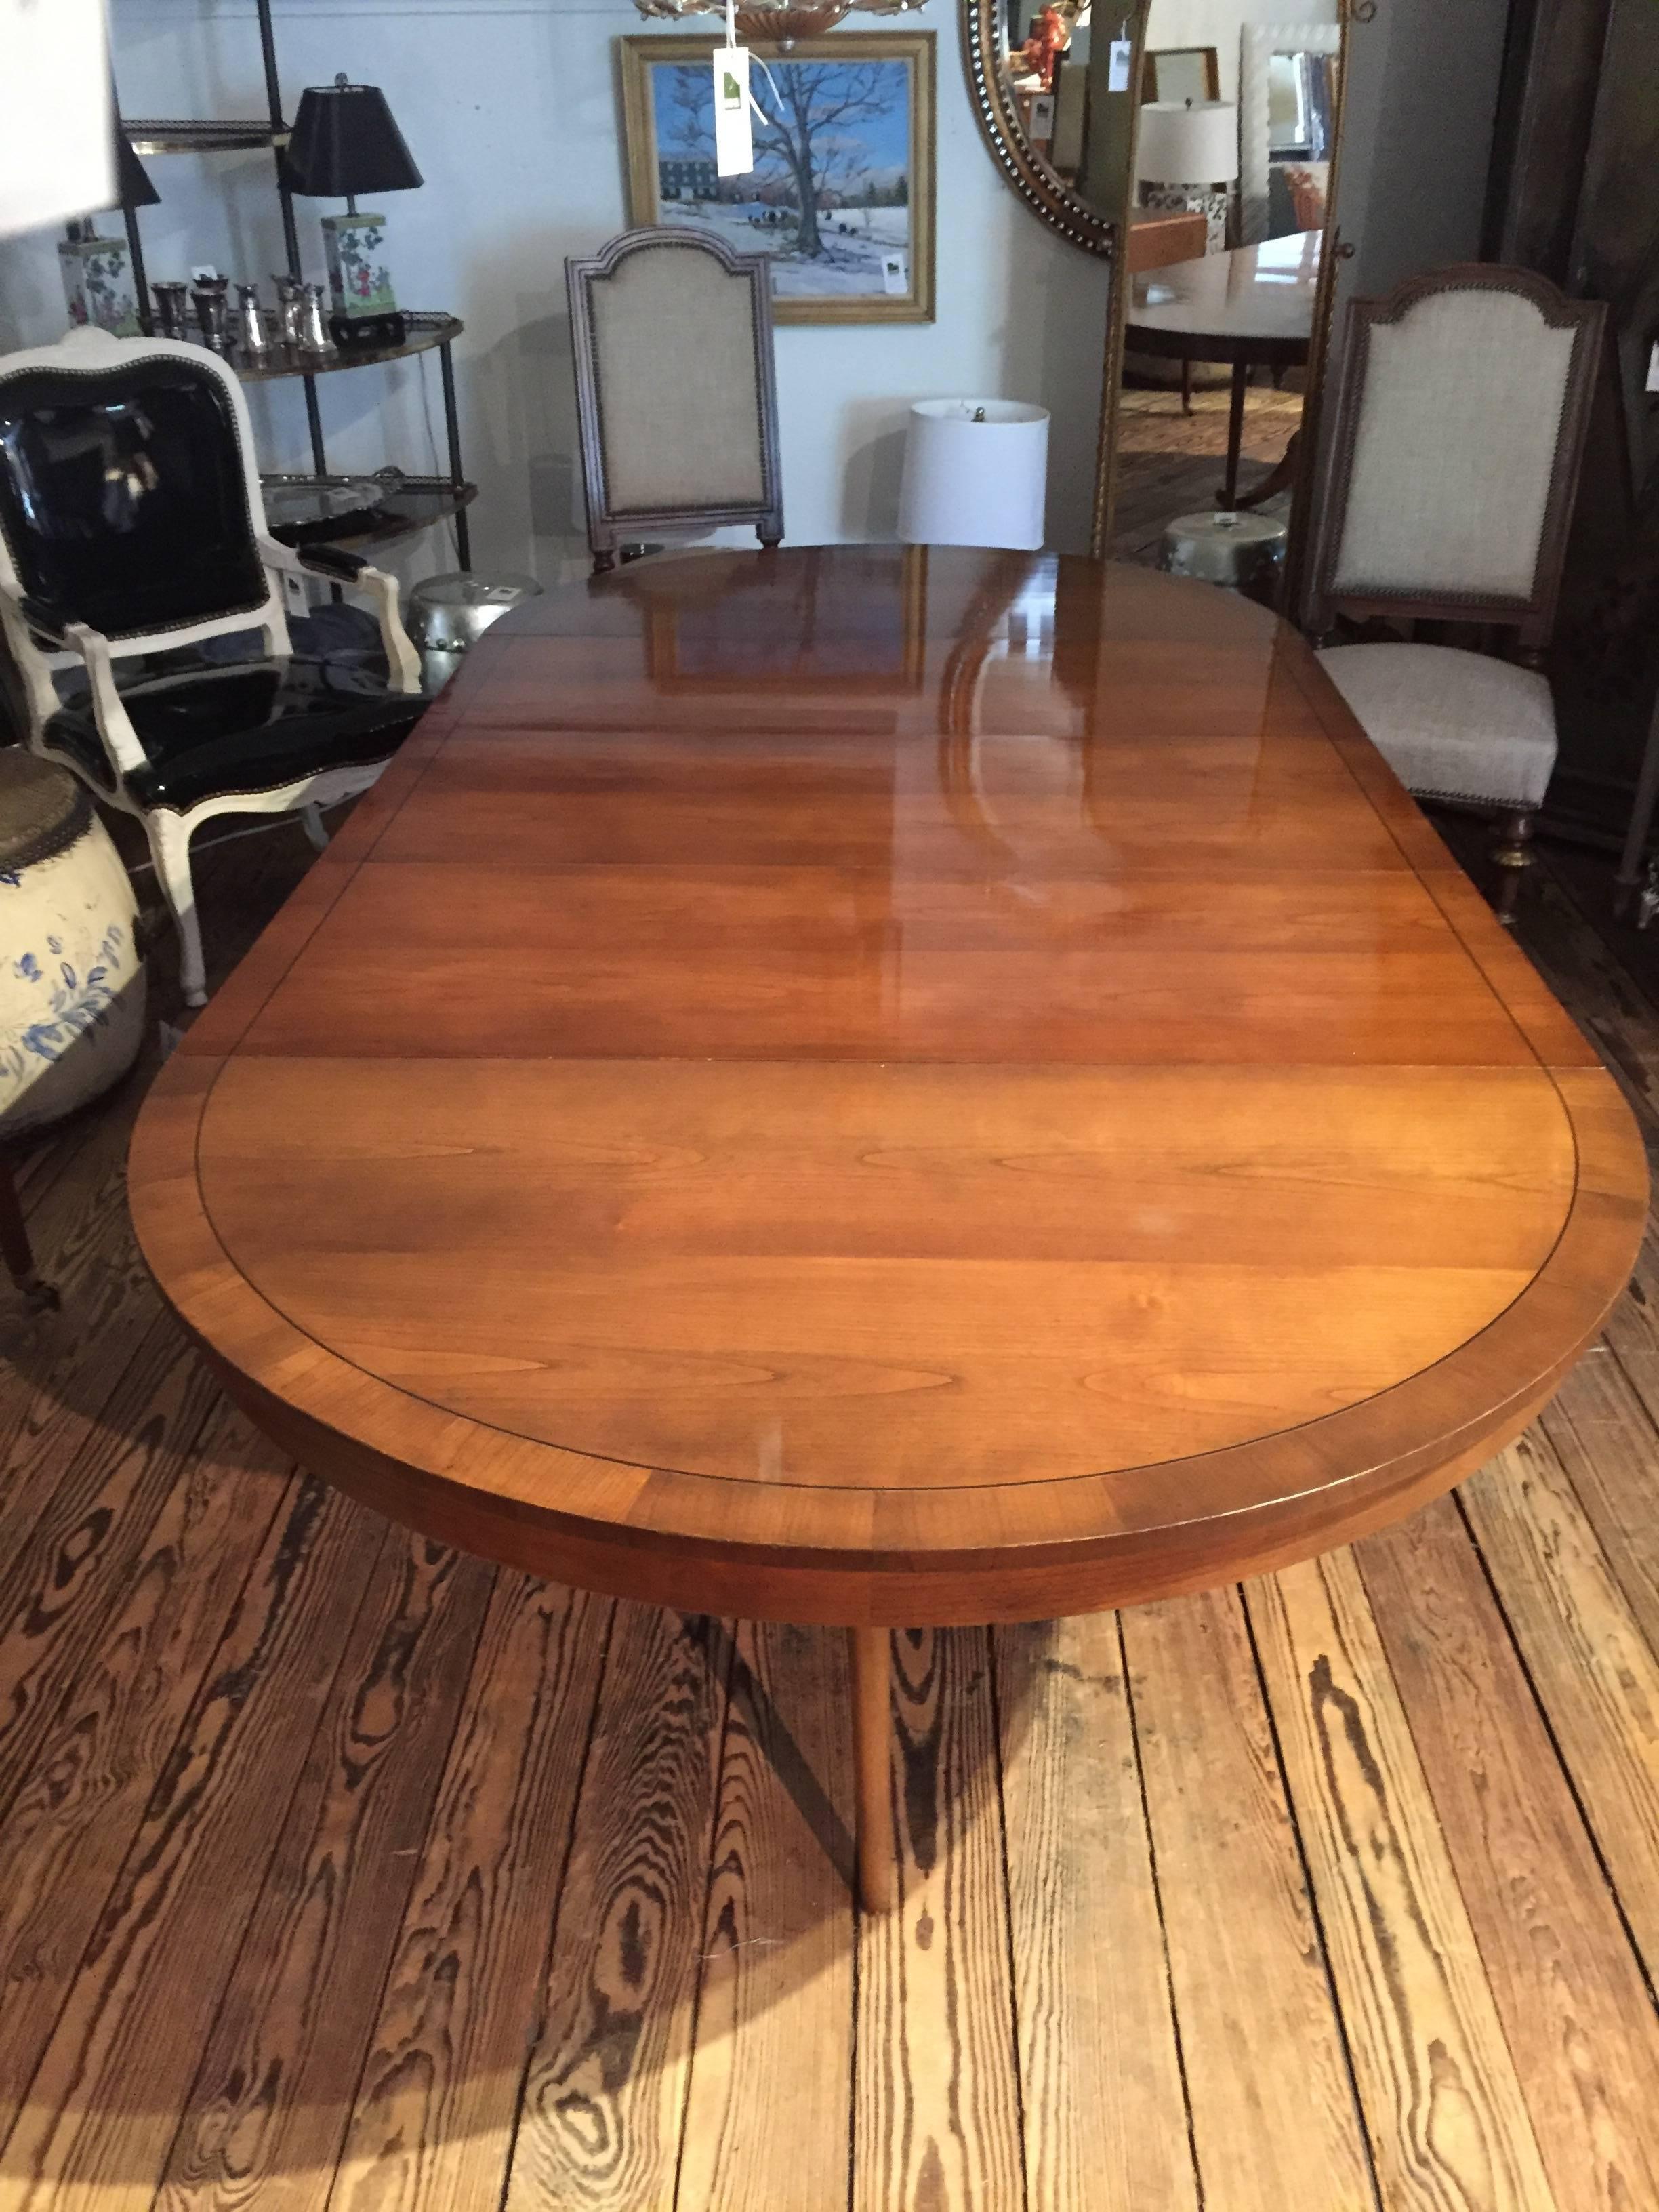 Fabulously expandable or shrinkable dining table, 4 ft round at its smallest, and then ingeniously pulls apart to make room for three leaves to create an elegant very long oval. Each leaf is 18 inches. Has just been restored so in beautiful vintage